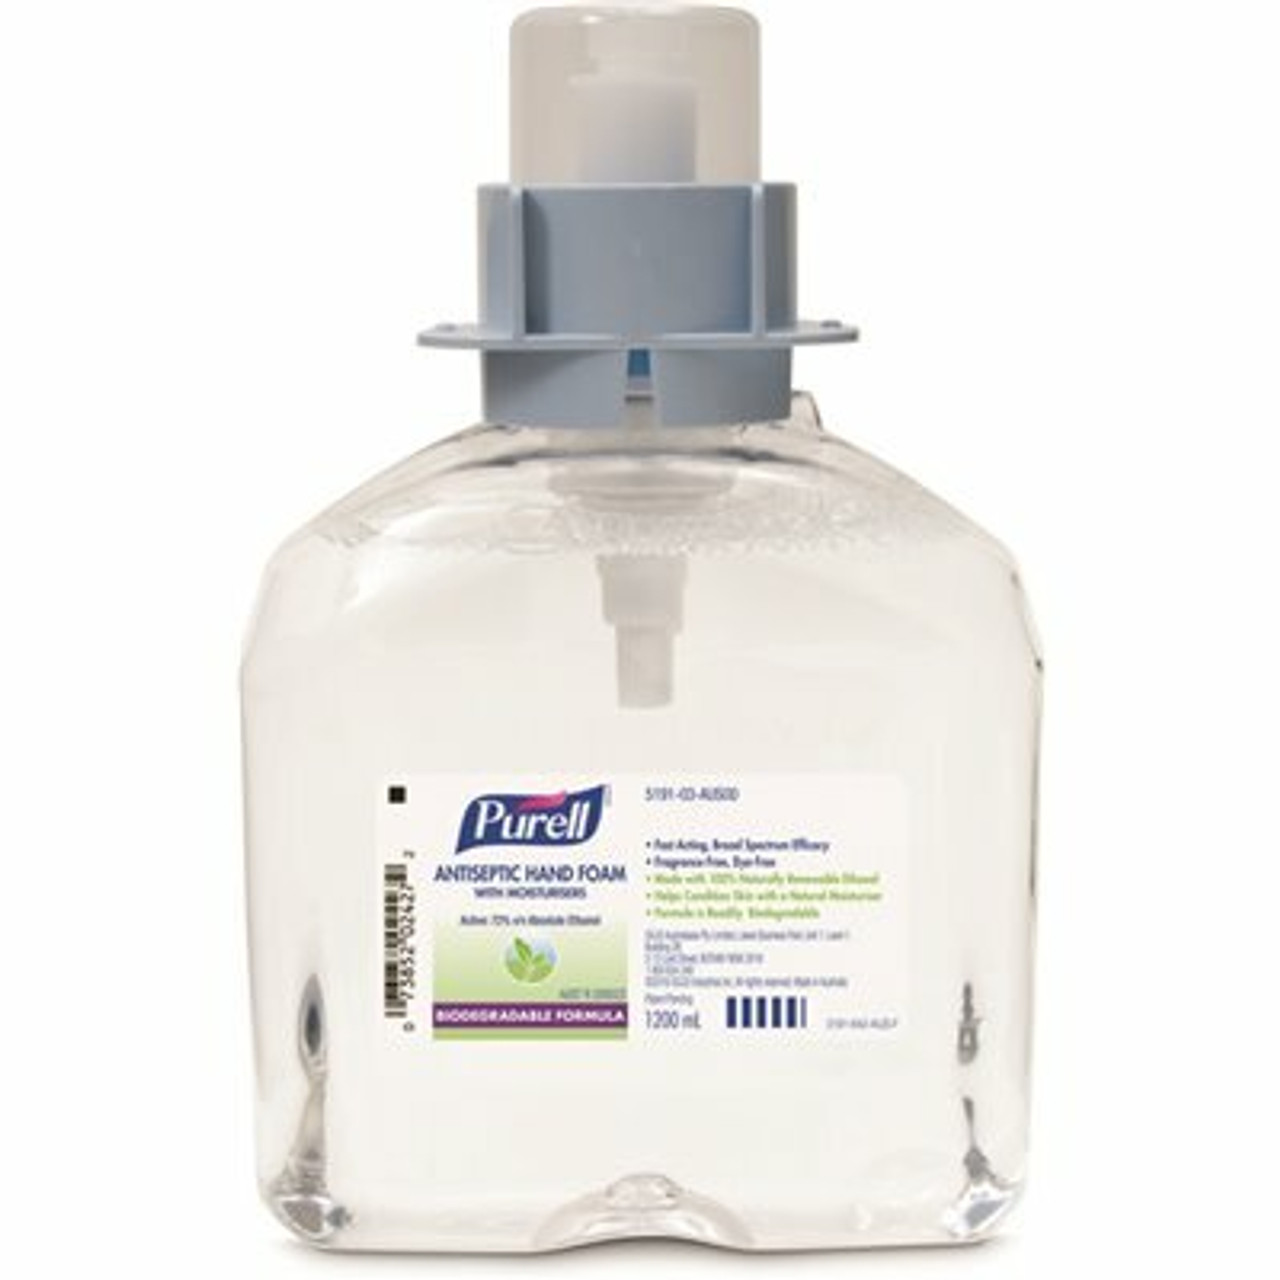 Purell Advanced Green Certified Instant 1200 Ml Fragrance Free Hand Sanitizer Foam Refill (4-Pack)